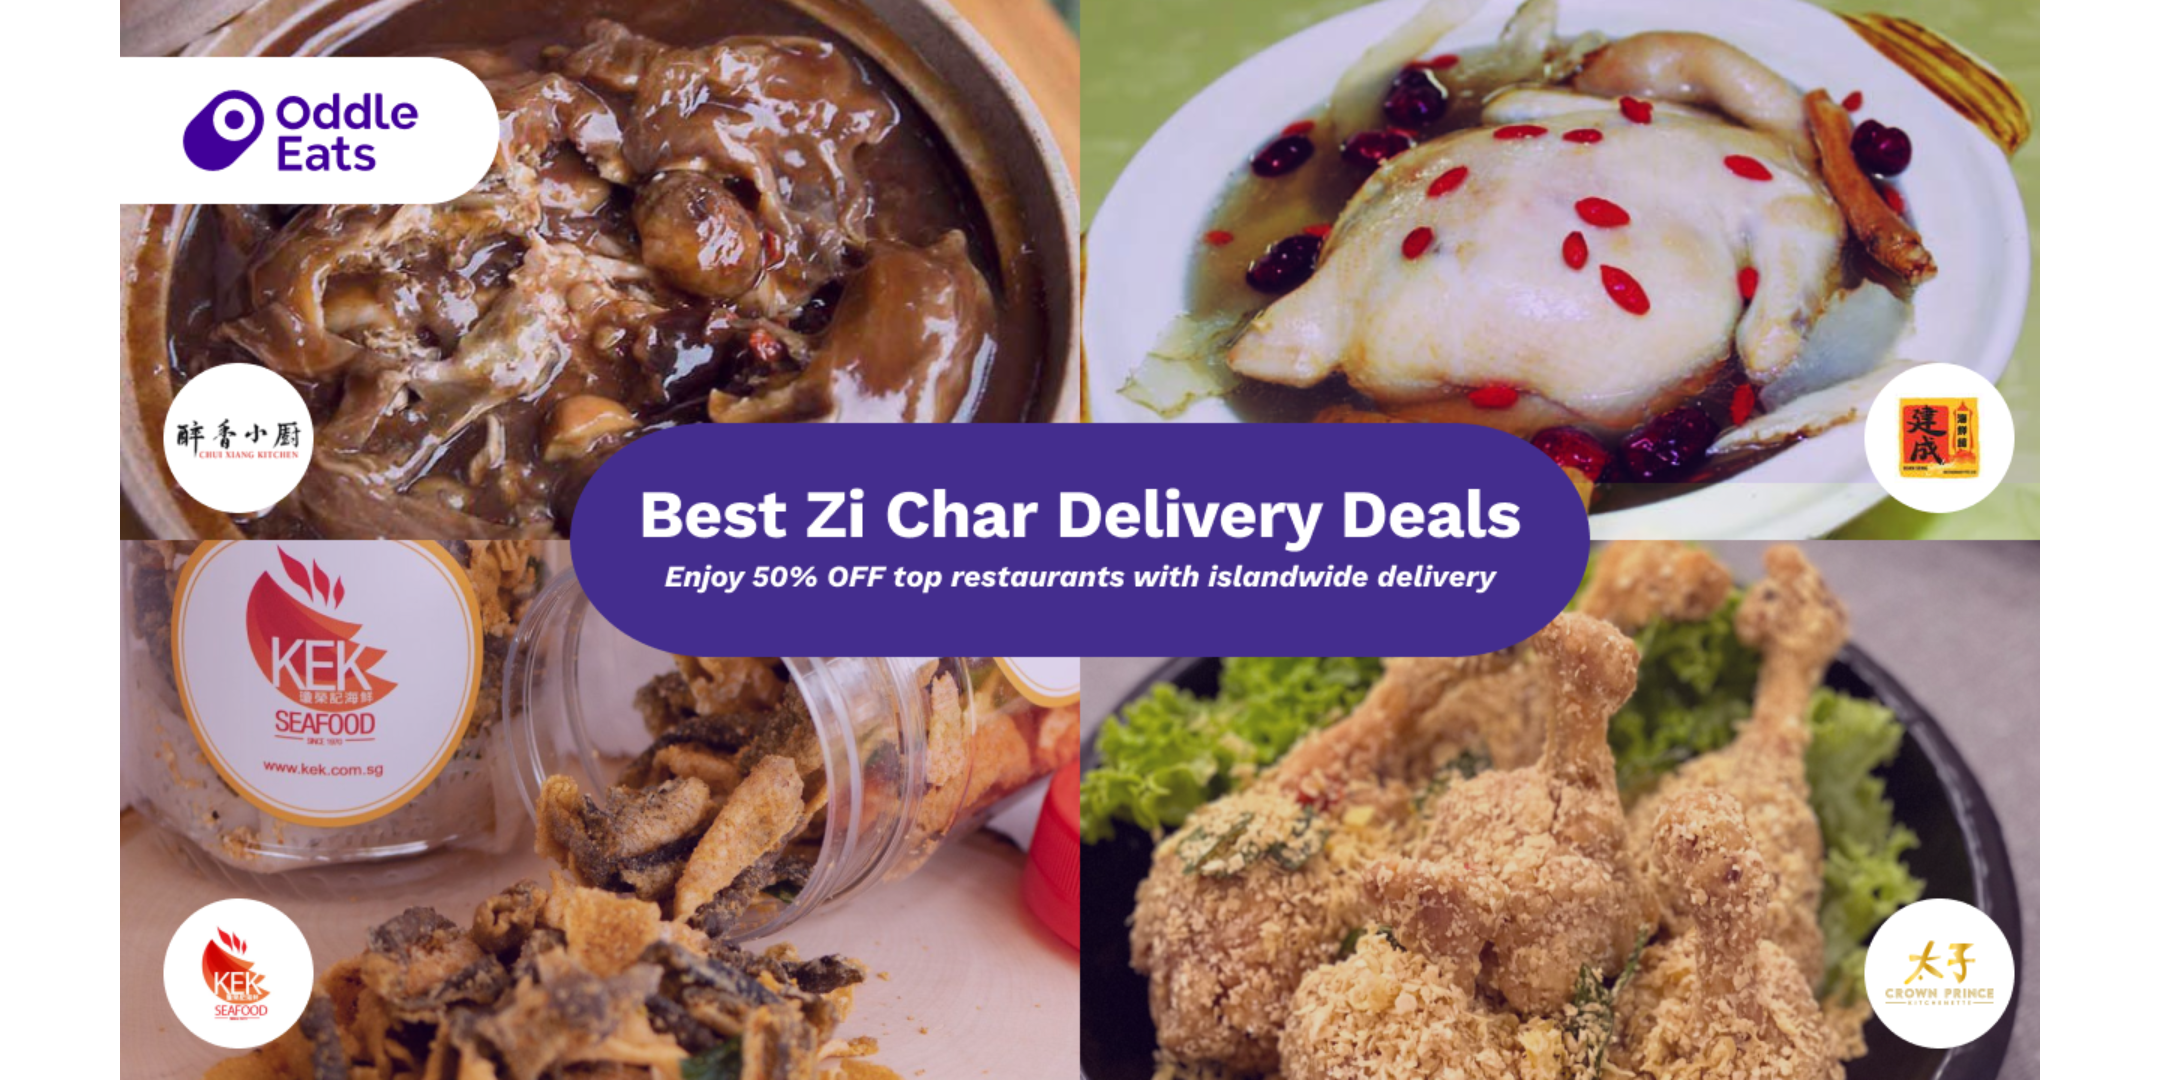 Top 5 Zi Char Places with 50% OFF on Oddle Eats, From $5.45 Per Dish